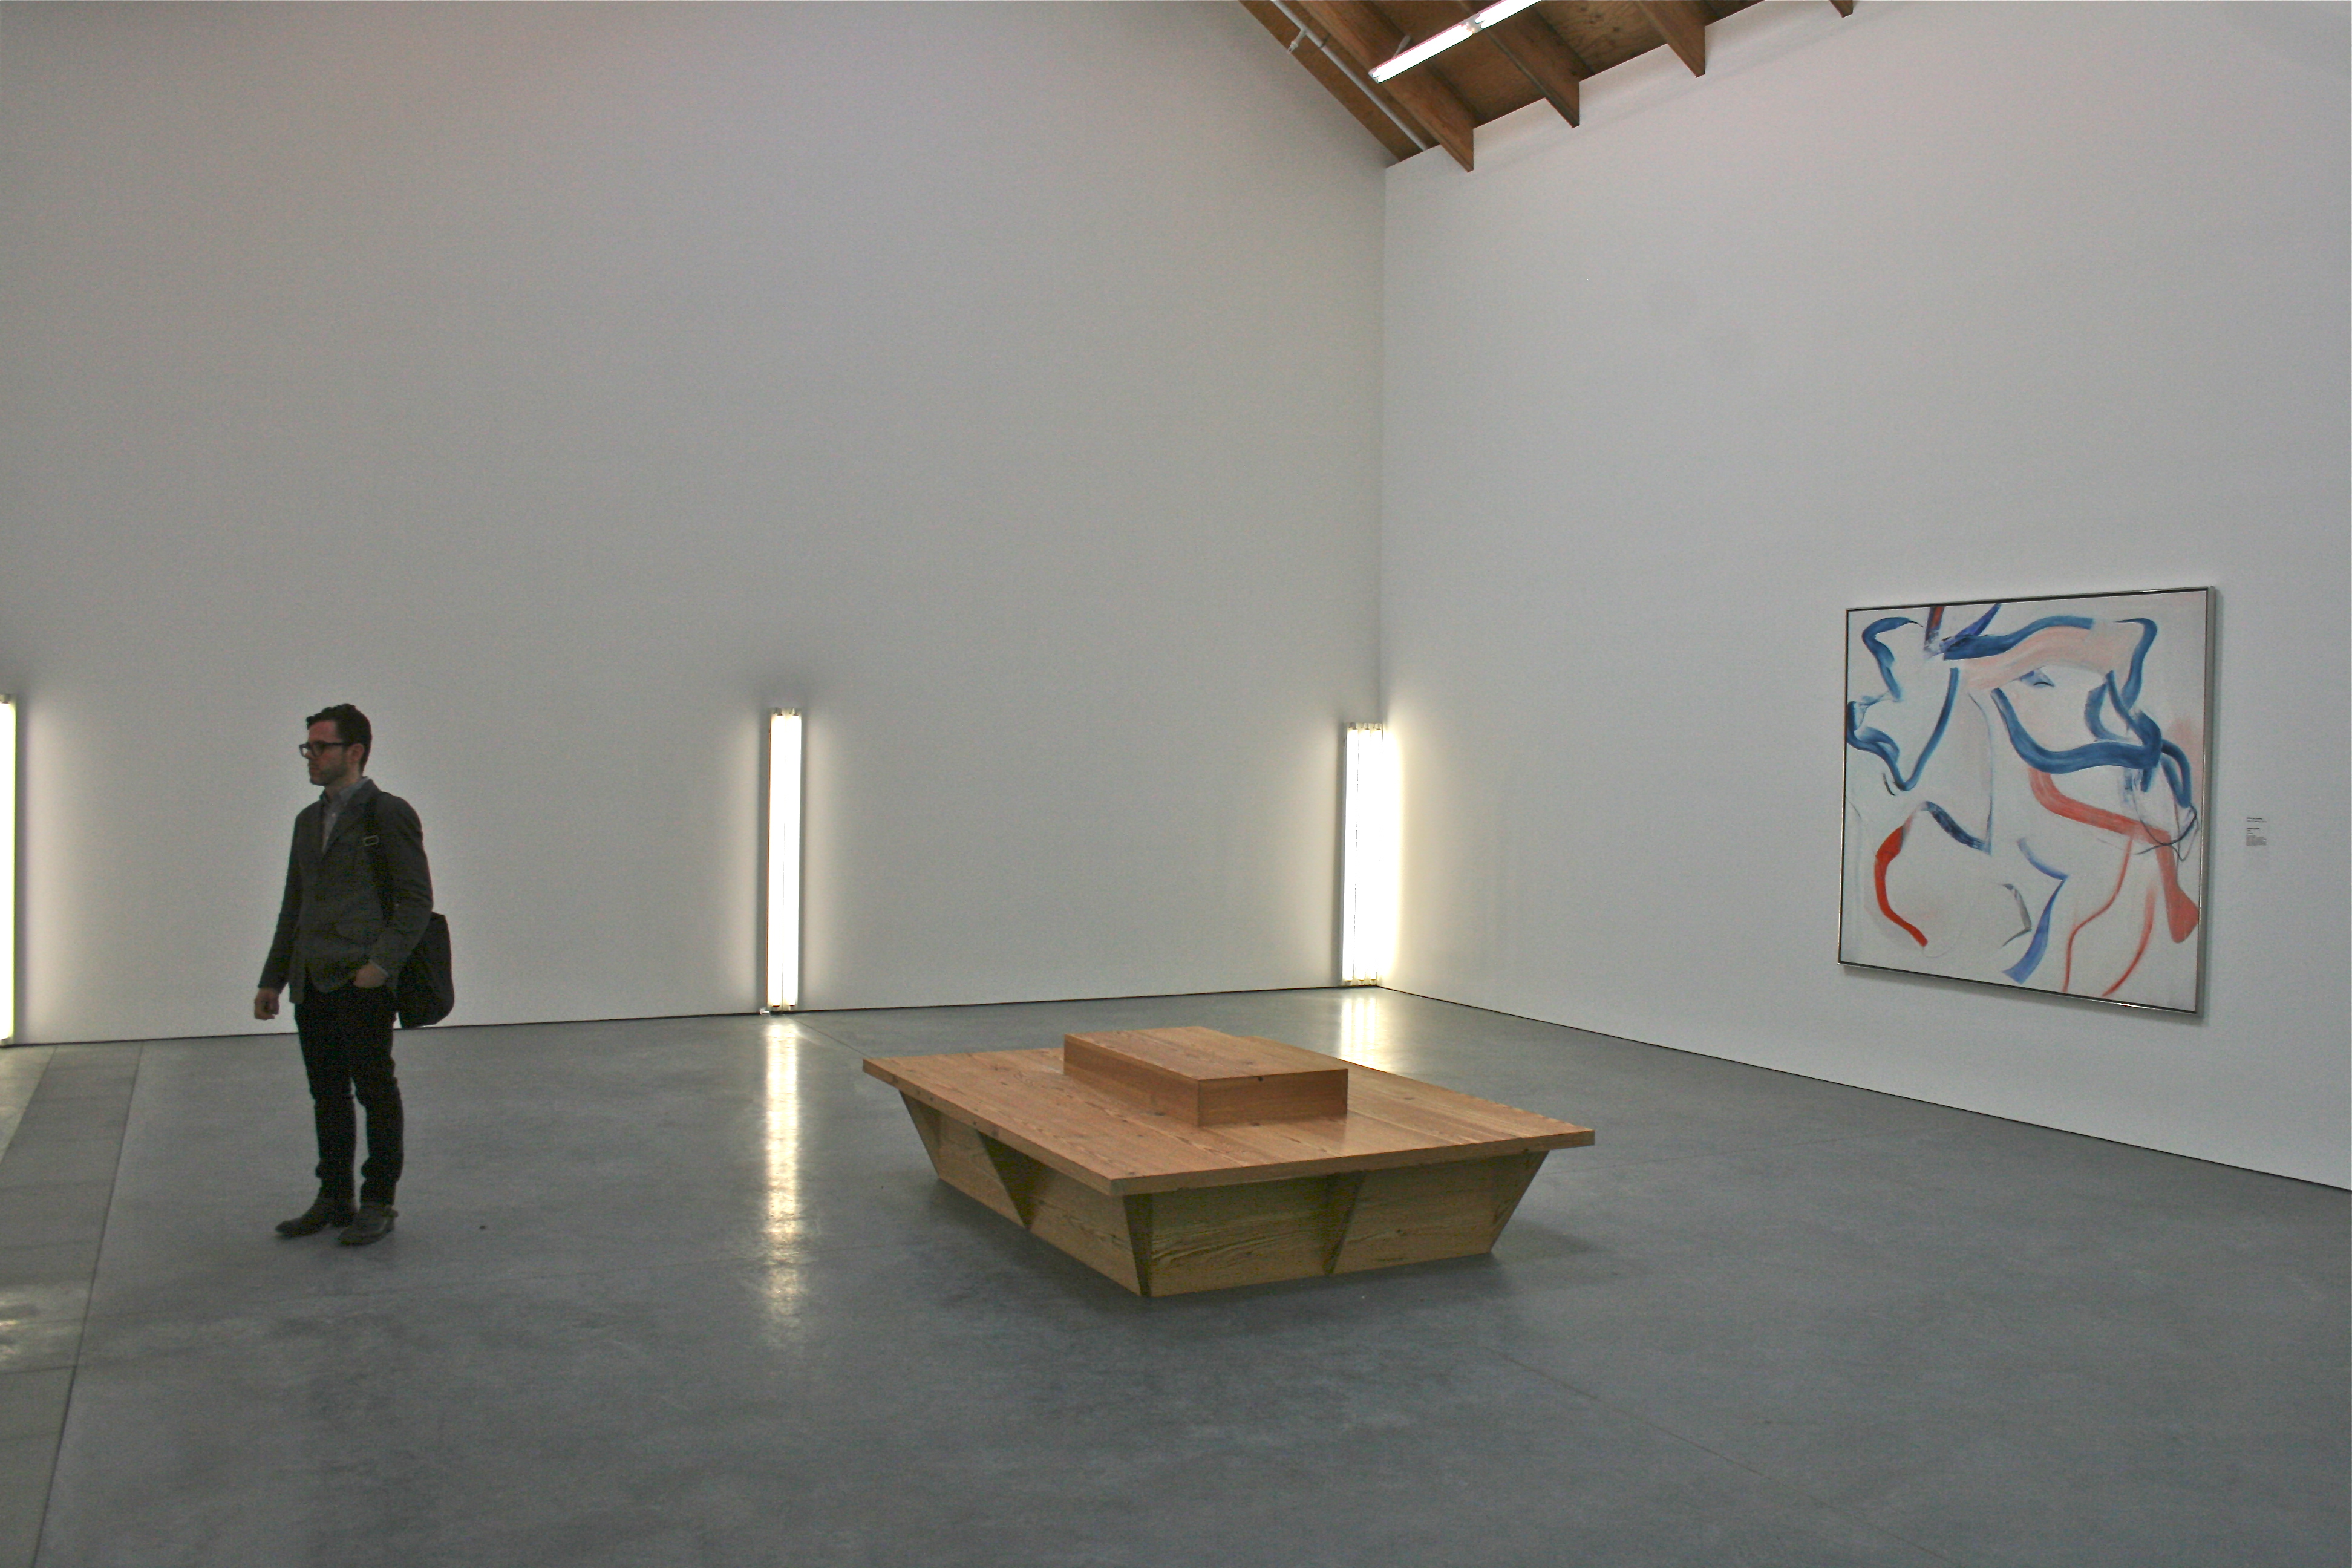 Work by Dan Flavin and Willem de Kooning at the Parrish Art Museum in Water Mill